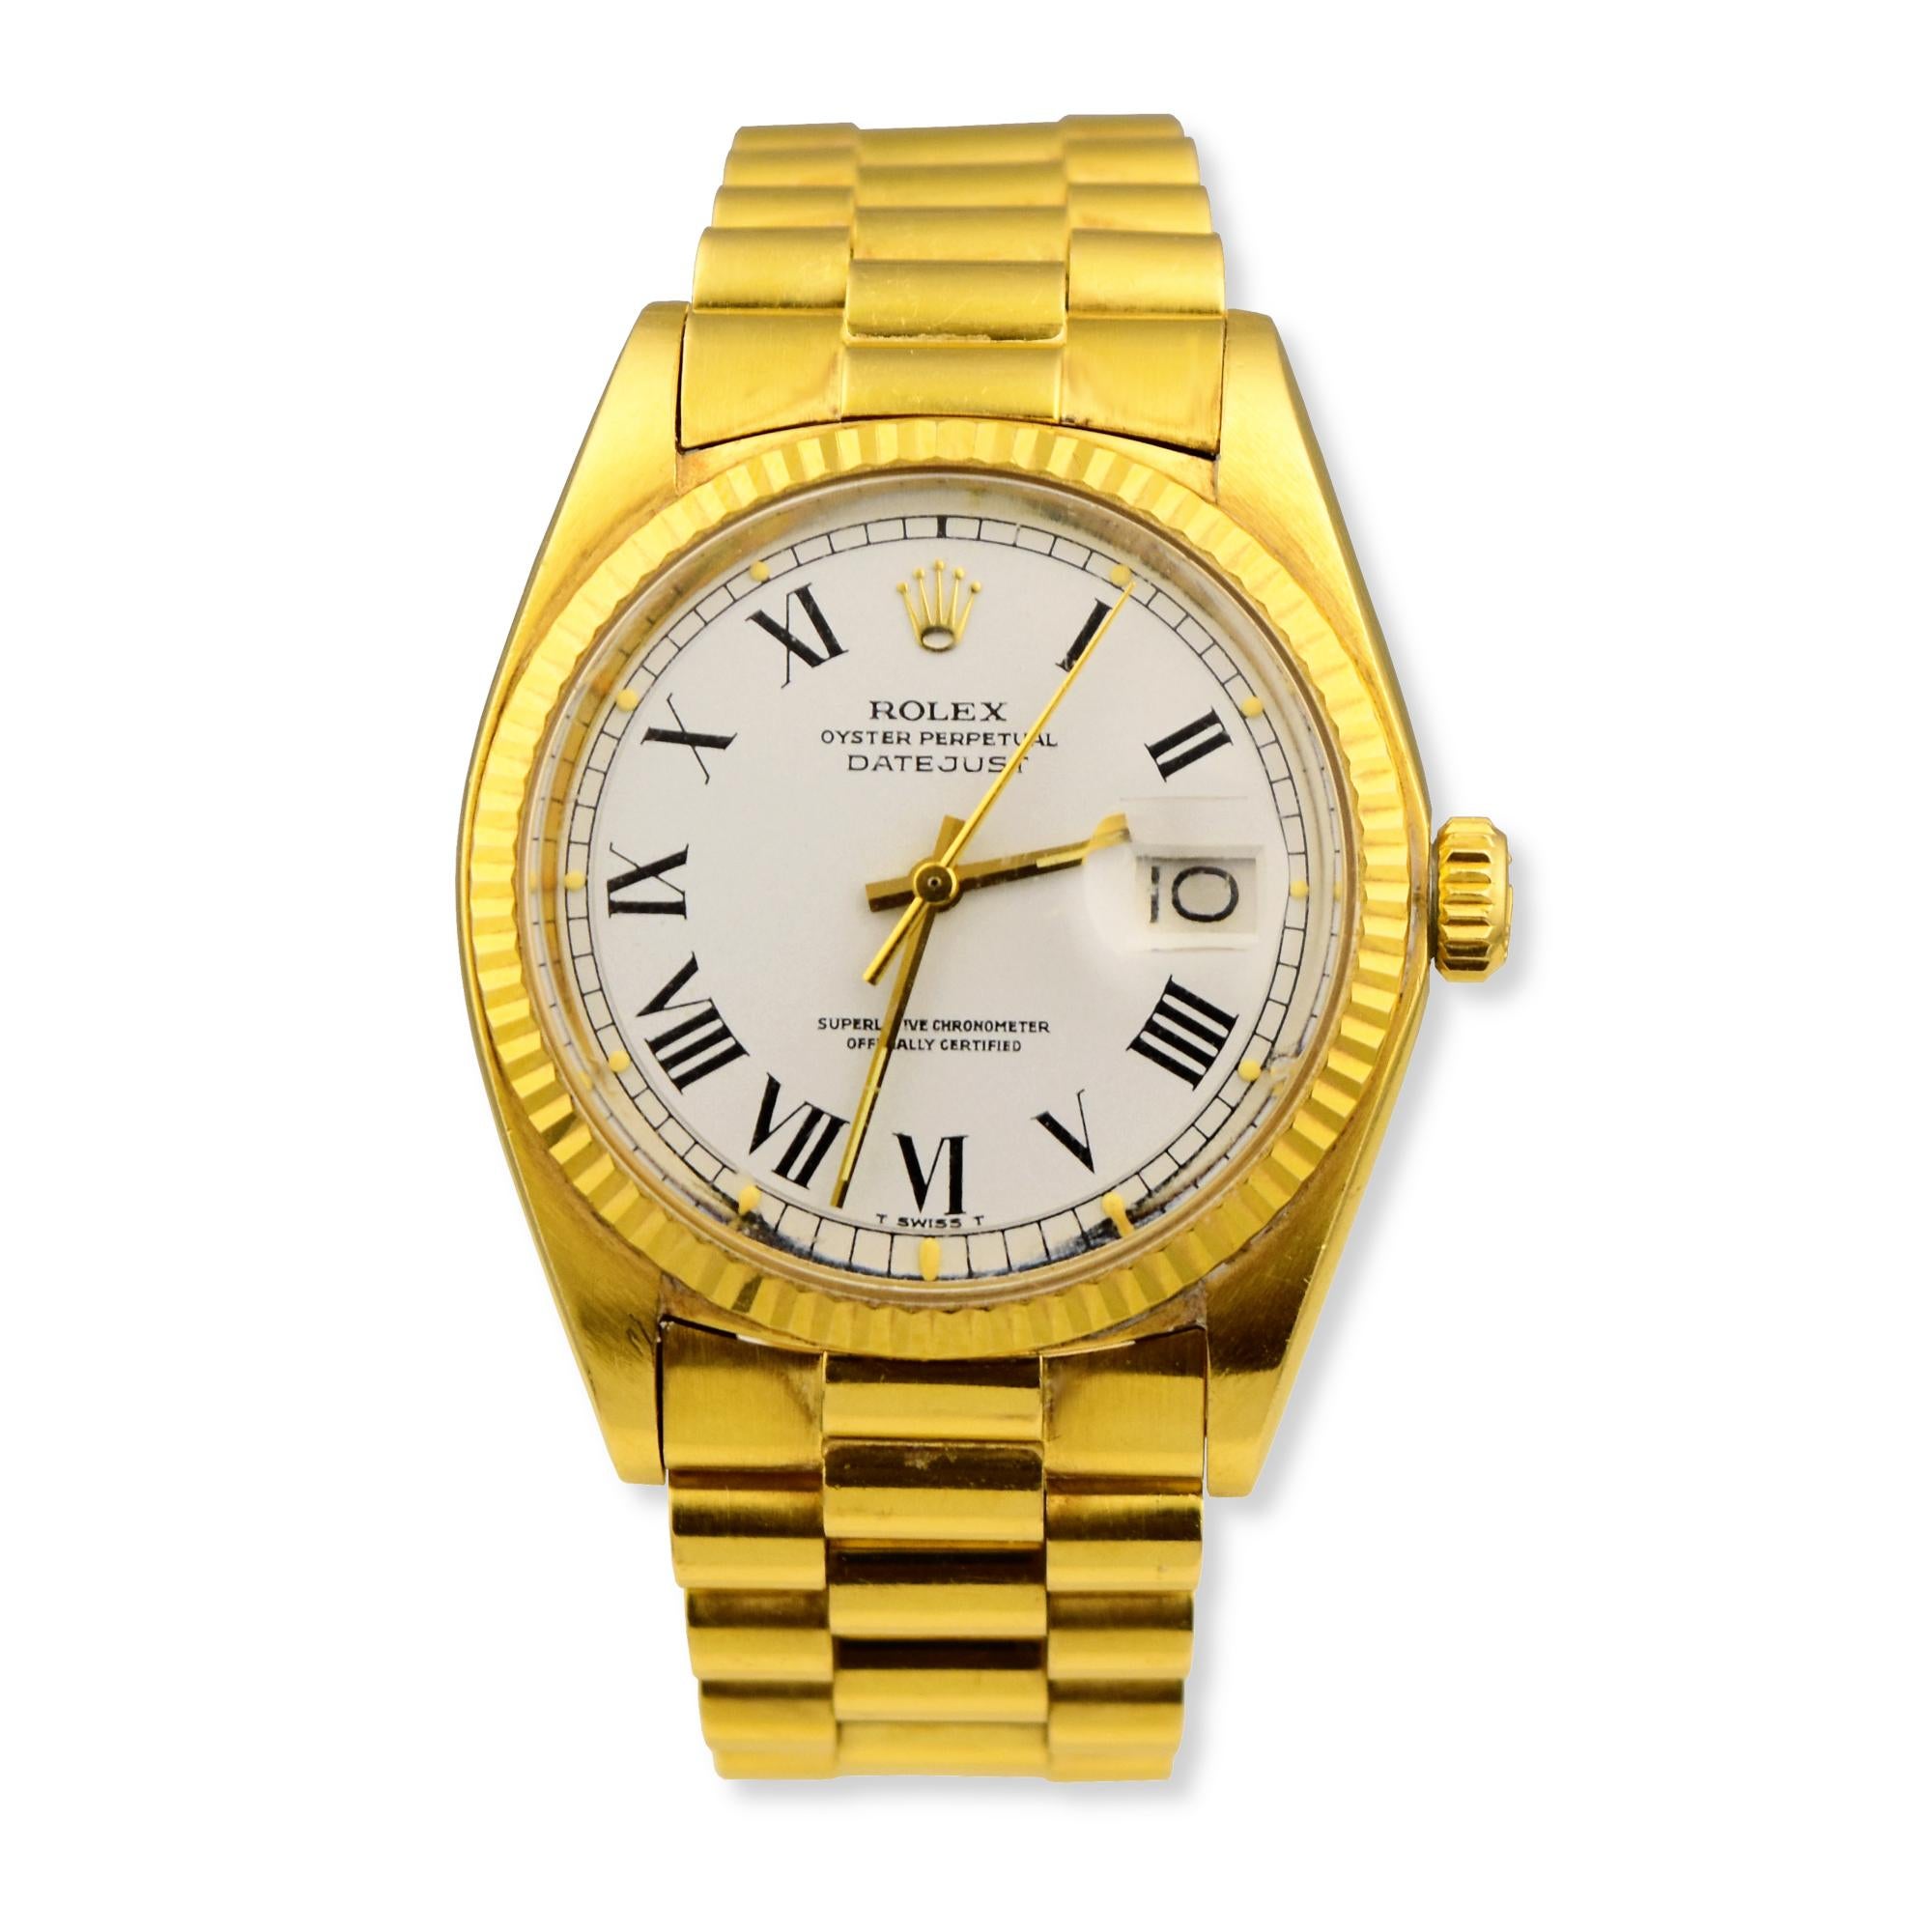 Brand: Rolex

Model Name: Datejust

Model Number:  1600

Movement: Automatic

Case Size: 36 mm

Case Back: Closed

Case Material: Yellow Gold

Bezel: Fluted

Total Item Weight(grams): approx. 120 g

Dial: White

Bracelet:  Yellow Gold

Hour Markers: